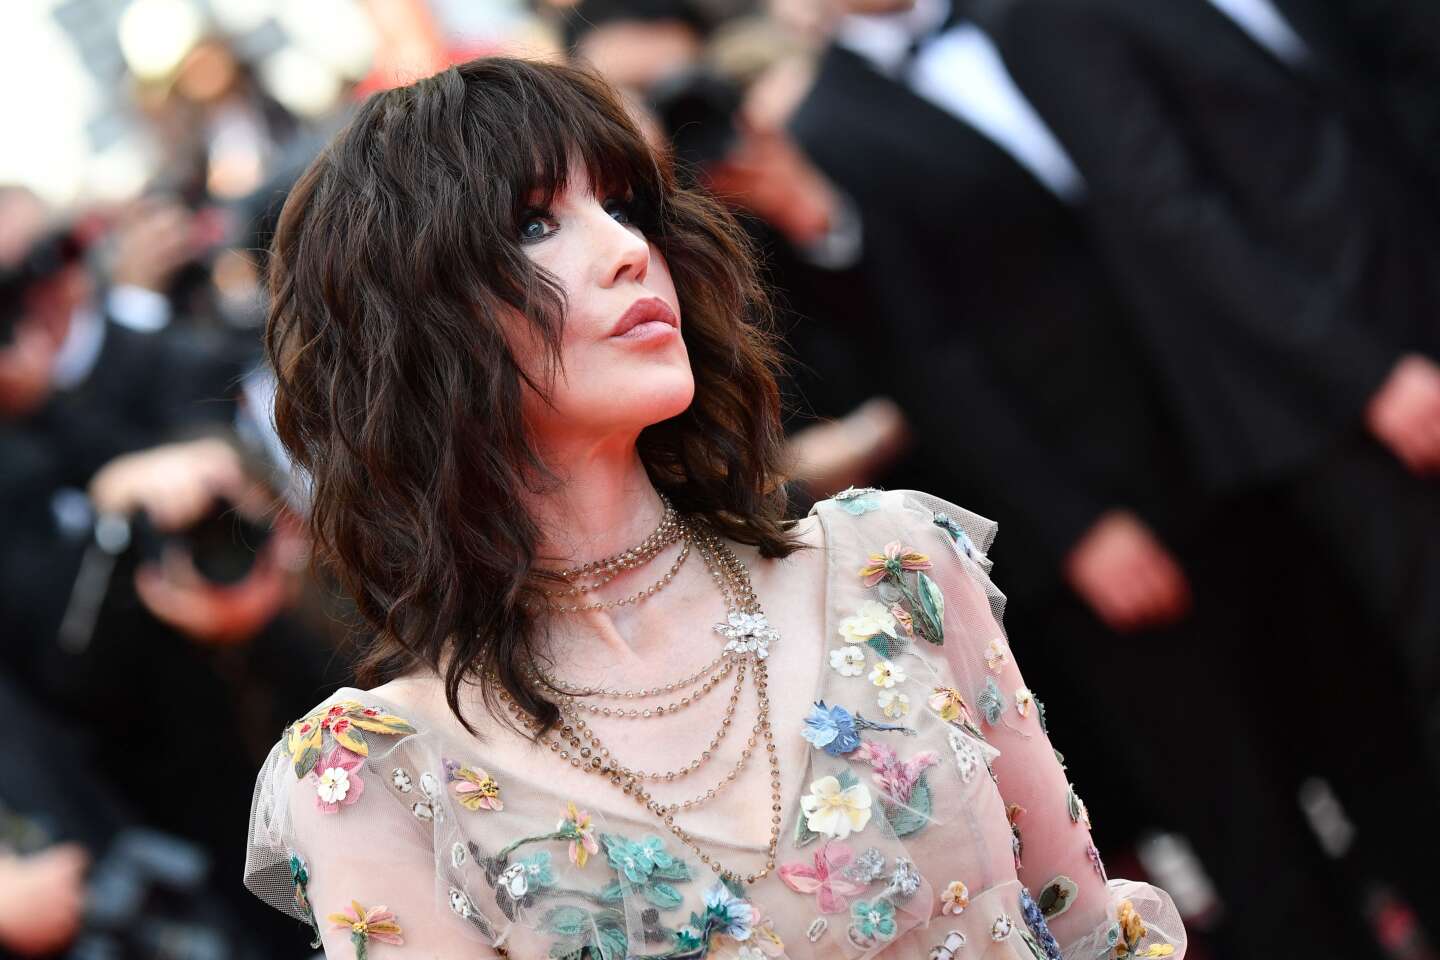 Tax fraud: Isabelle Adjani sentenced to two years in prison and a fine of 250,000 euros